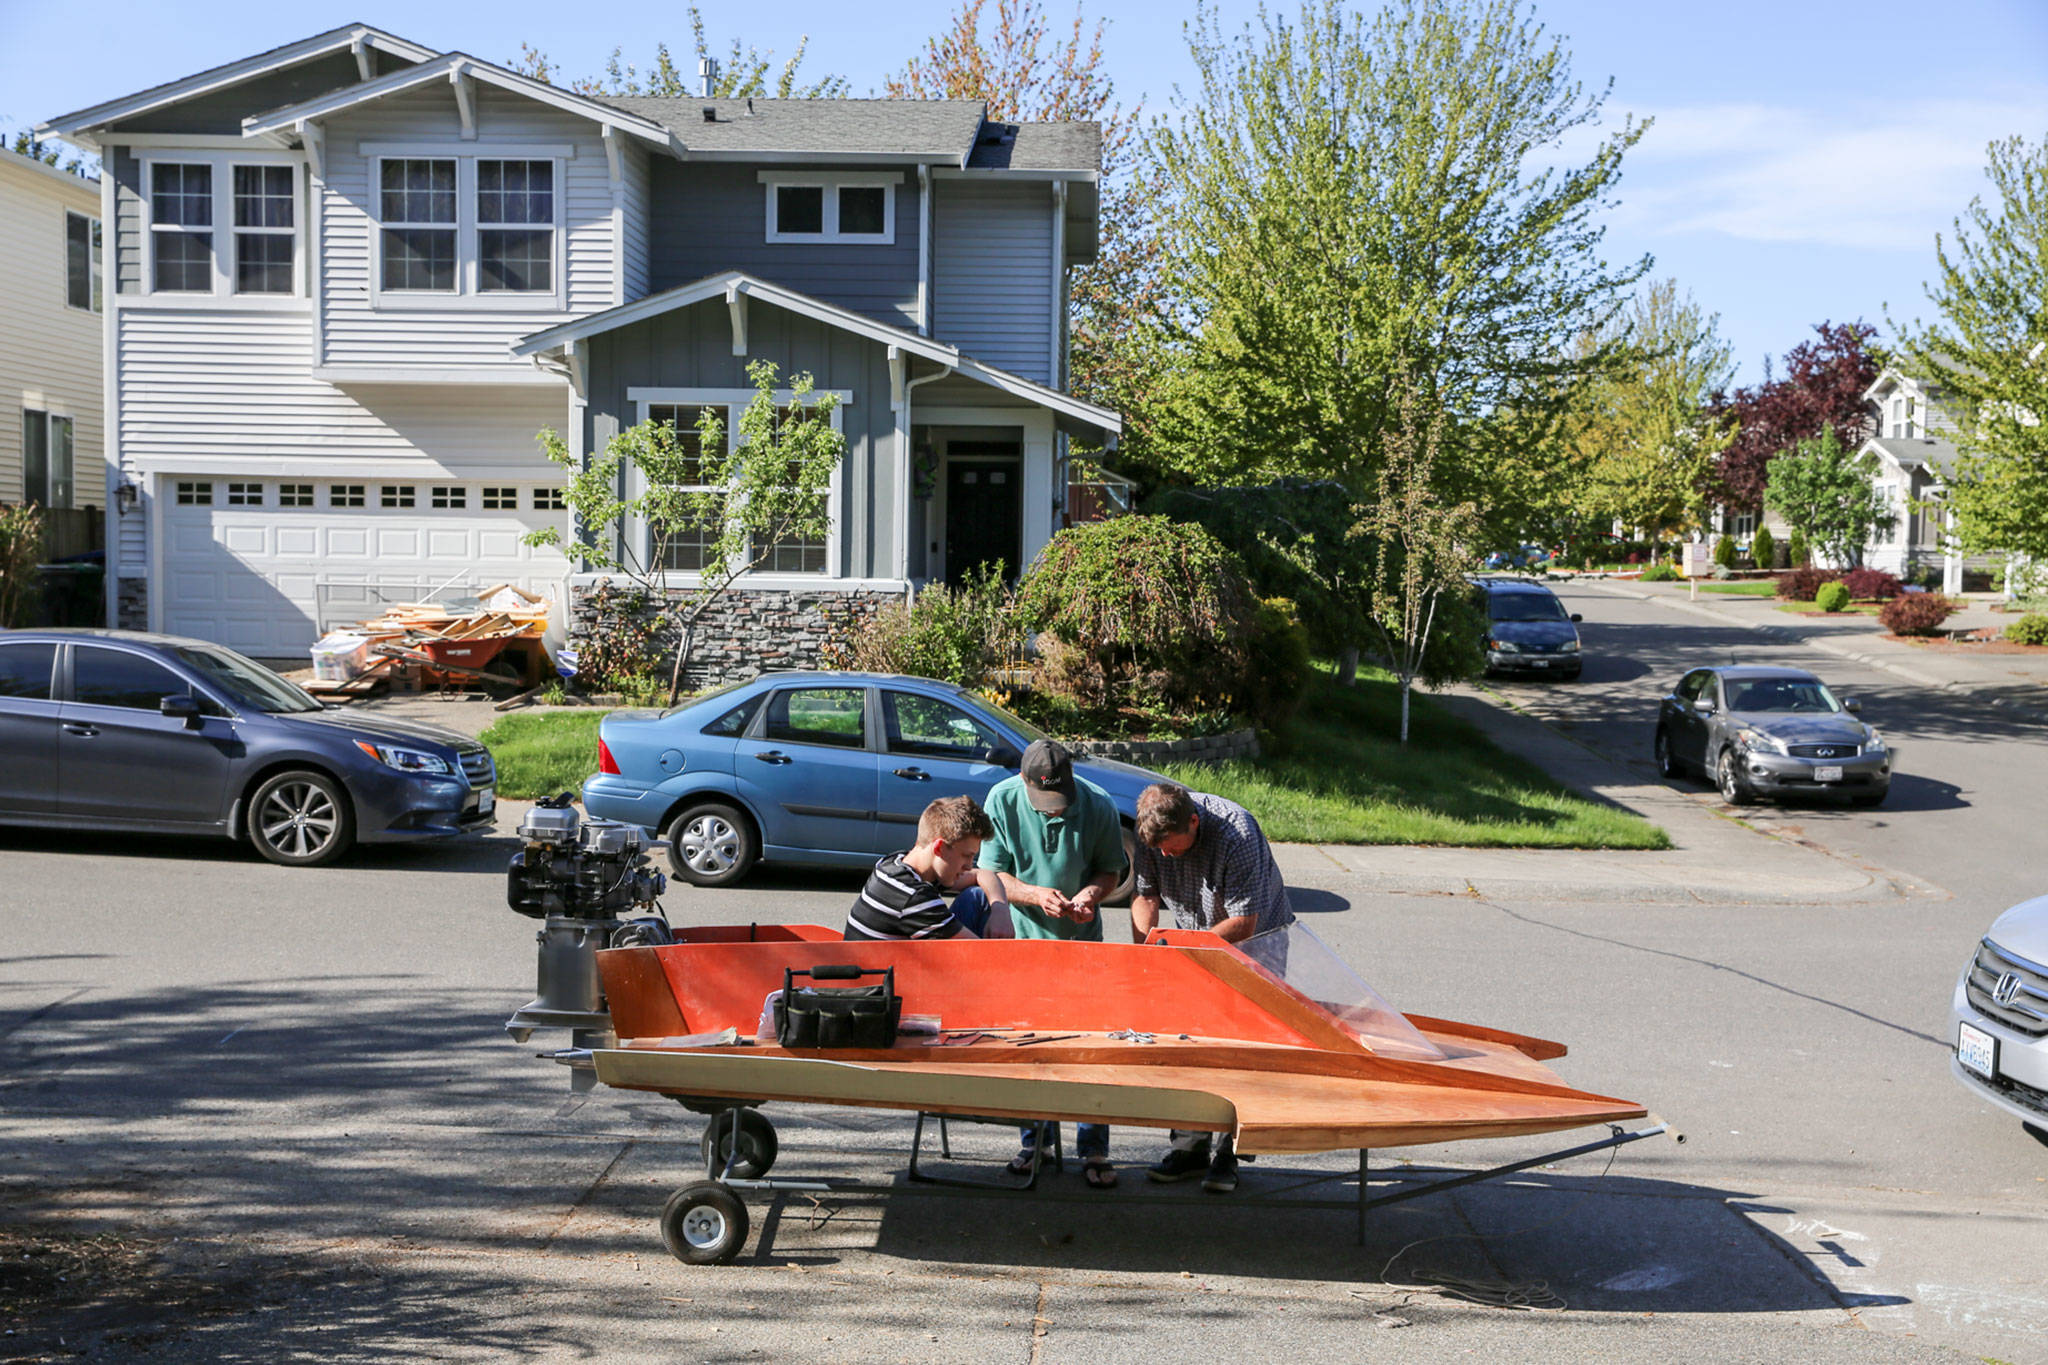 Peter Olesen (seated), Jim Tryon and Steve Olesen work to build Peter’s hydroplane Wednesday afternoon in Mill Creek. (Kevin Clark / The Herald)